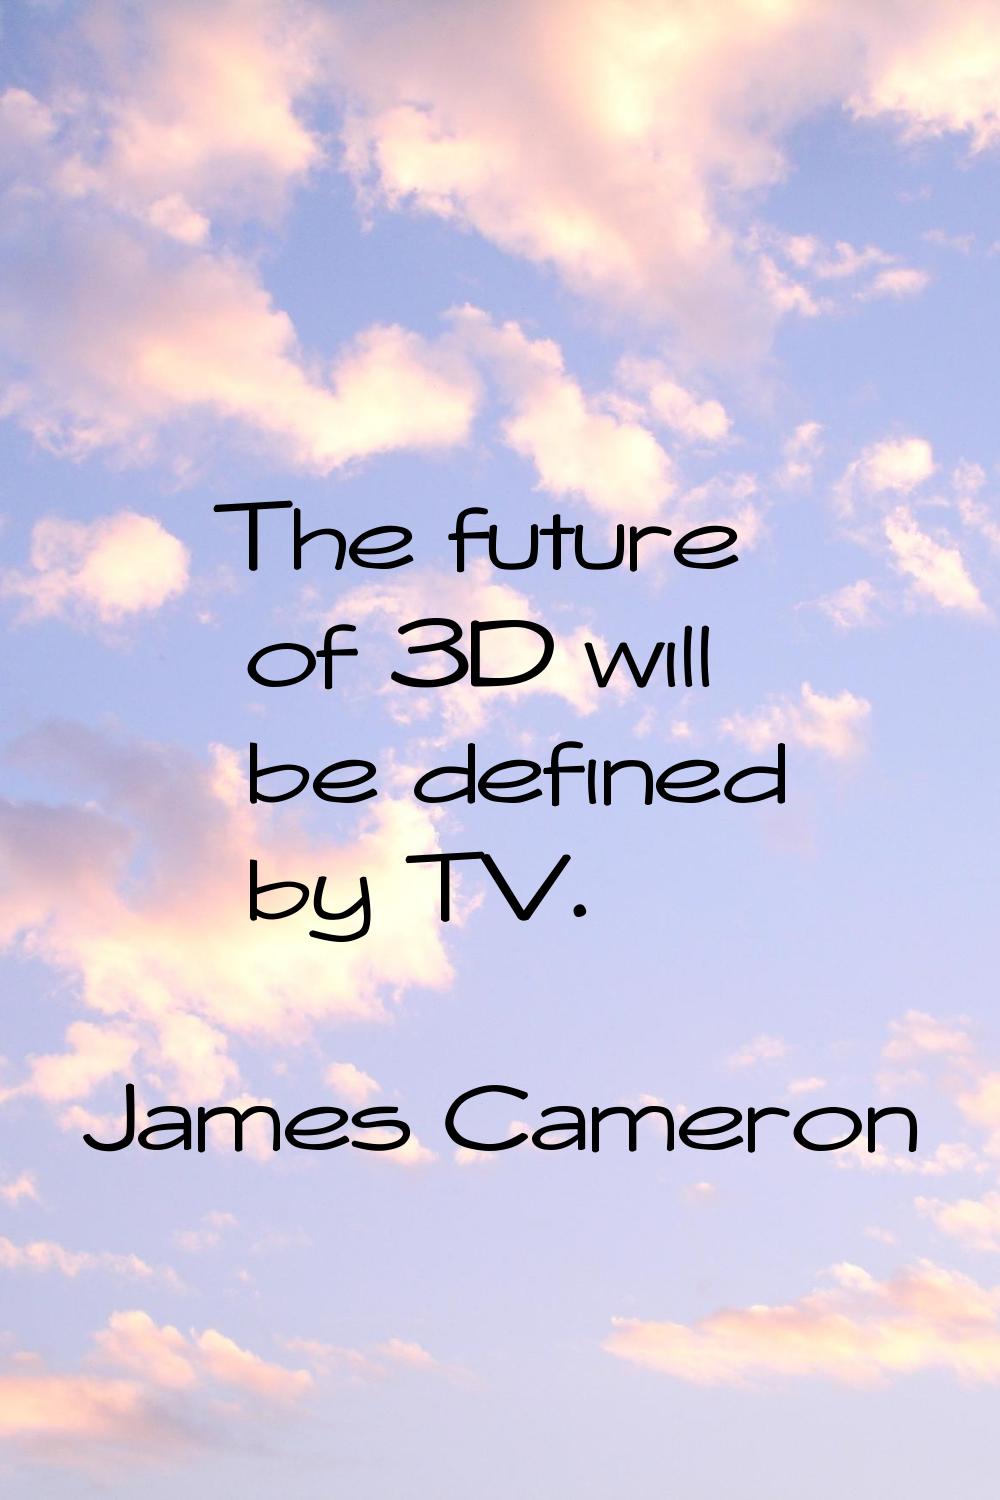 The future of 3D will be defined by TV.